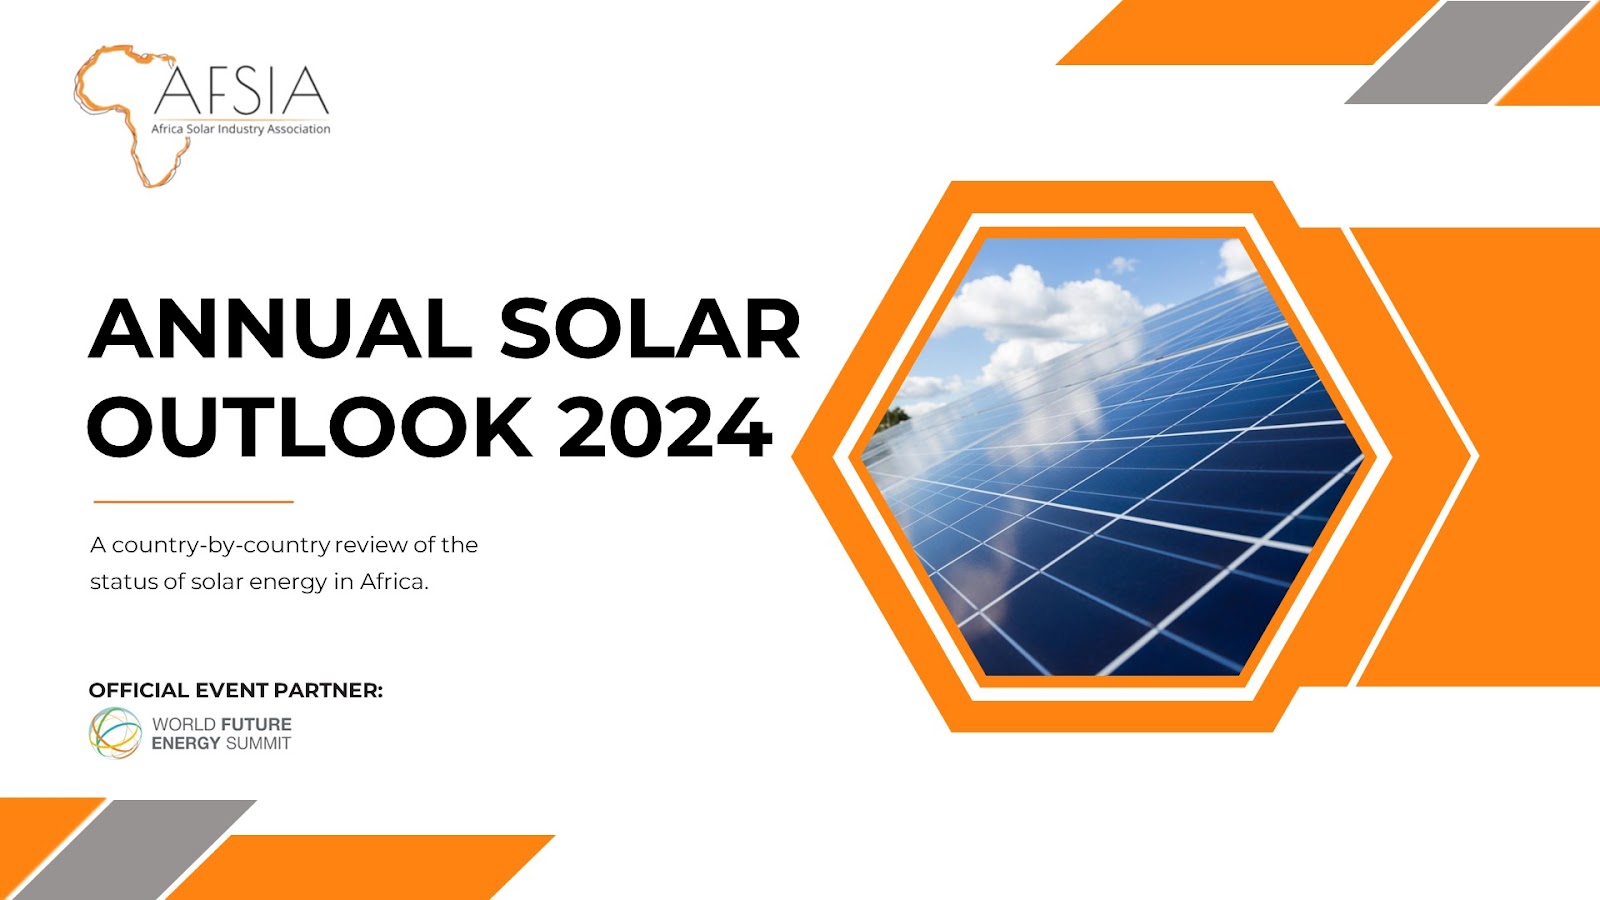 AFSIA African Annual Solar Outlook 2024